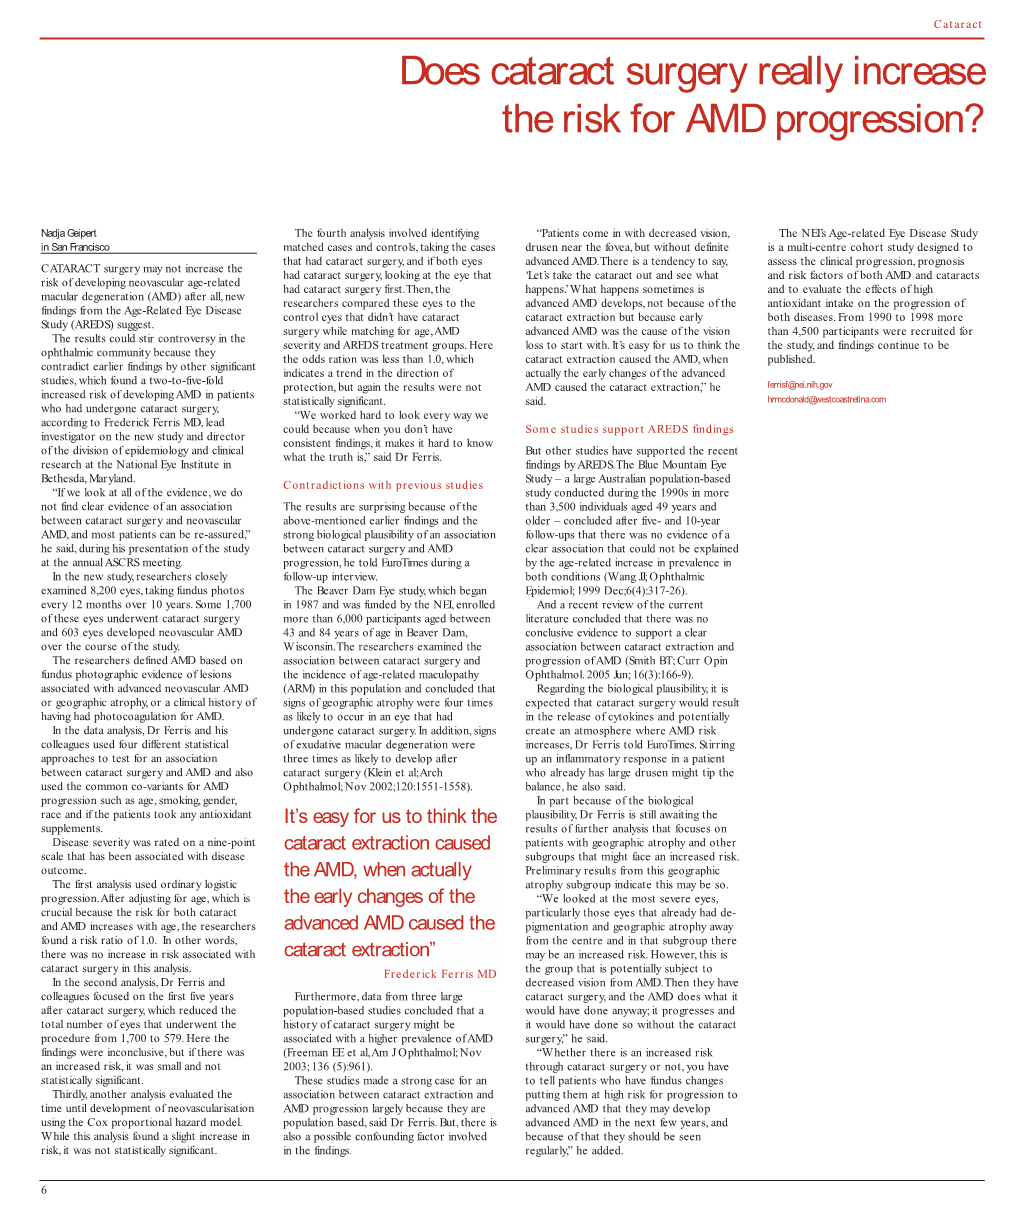 Does Cataract Surgery Really Increase the Risk for AMD Progression?